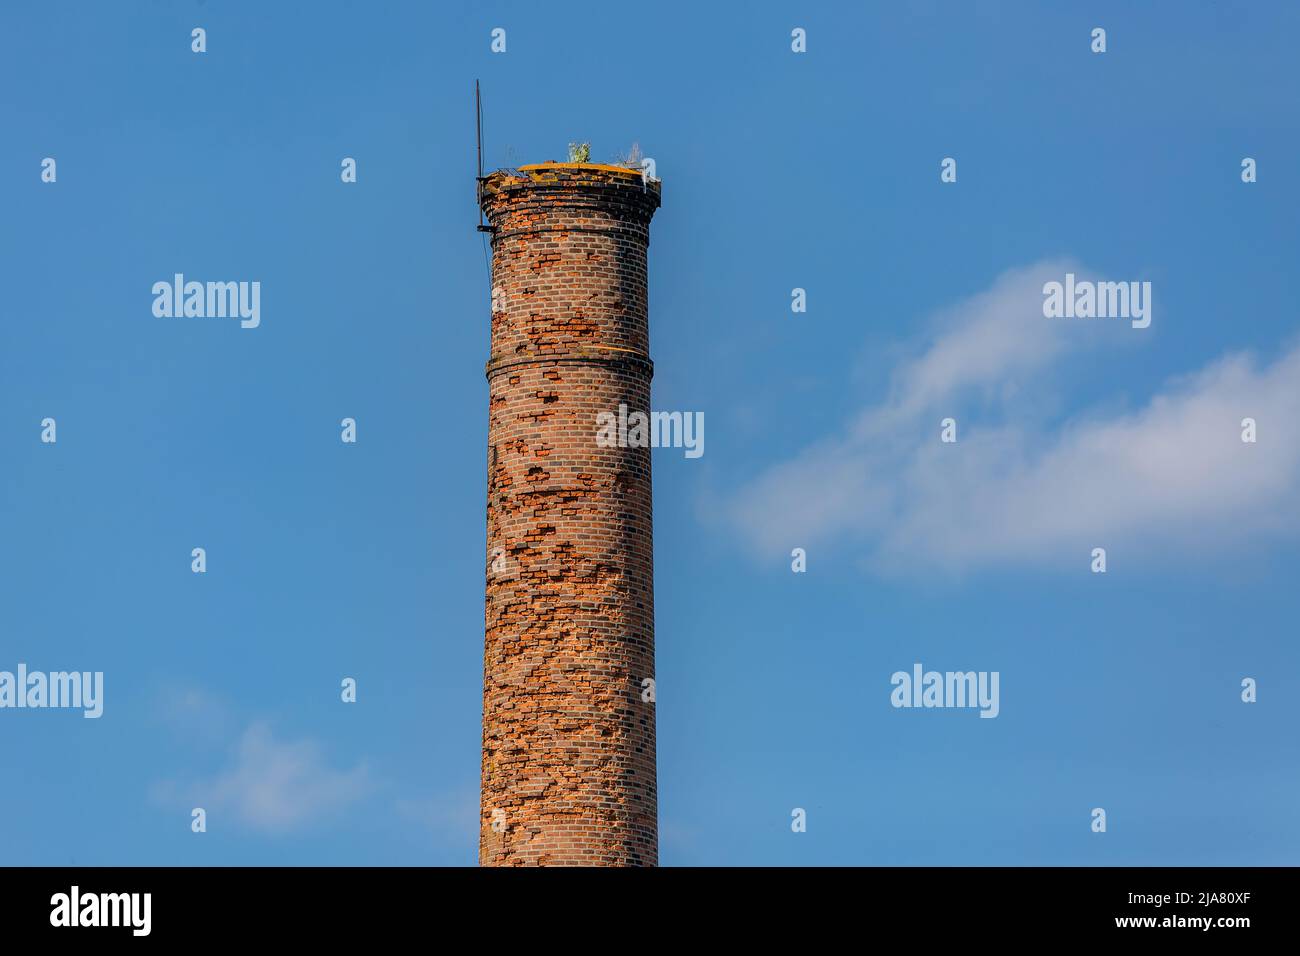 An old unused chimney made of red bricks, some of them chipped away. Sunny day with blue sky and white clouds in the background. Stock Photo